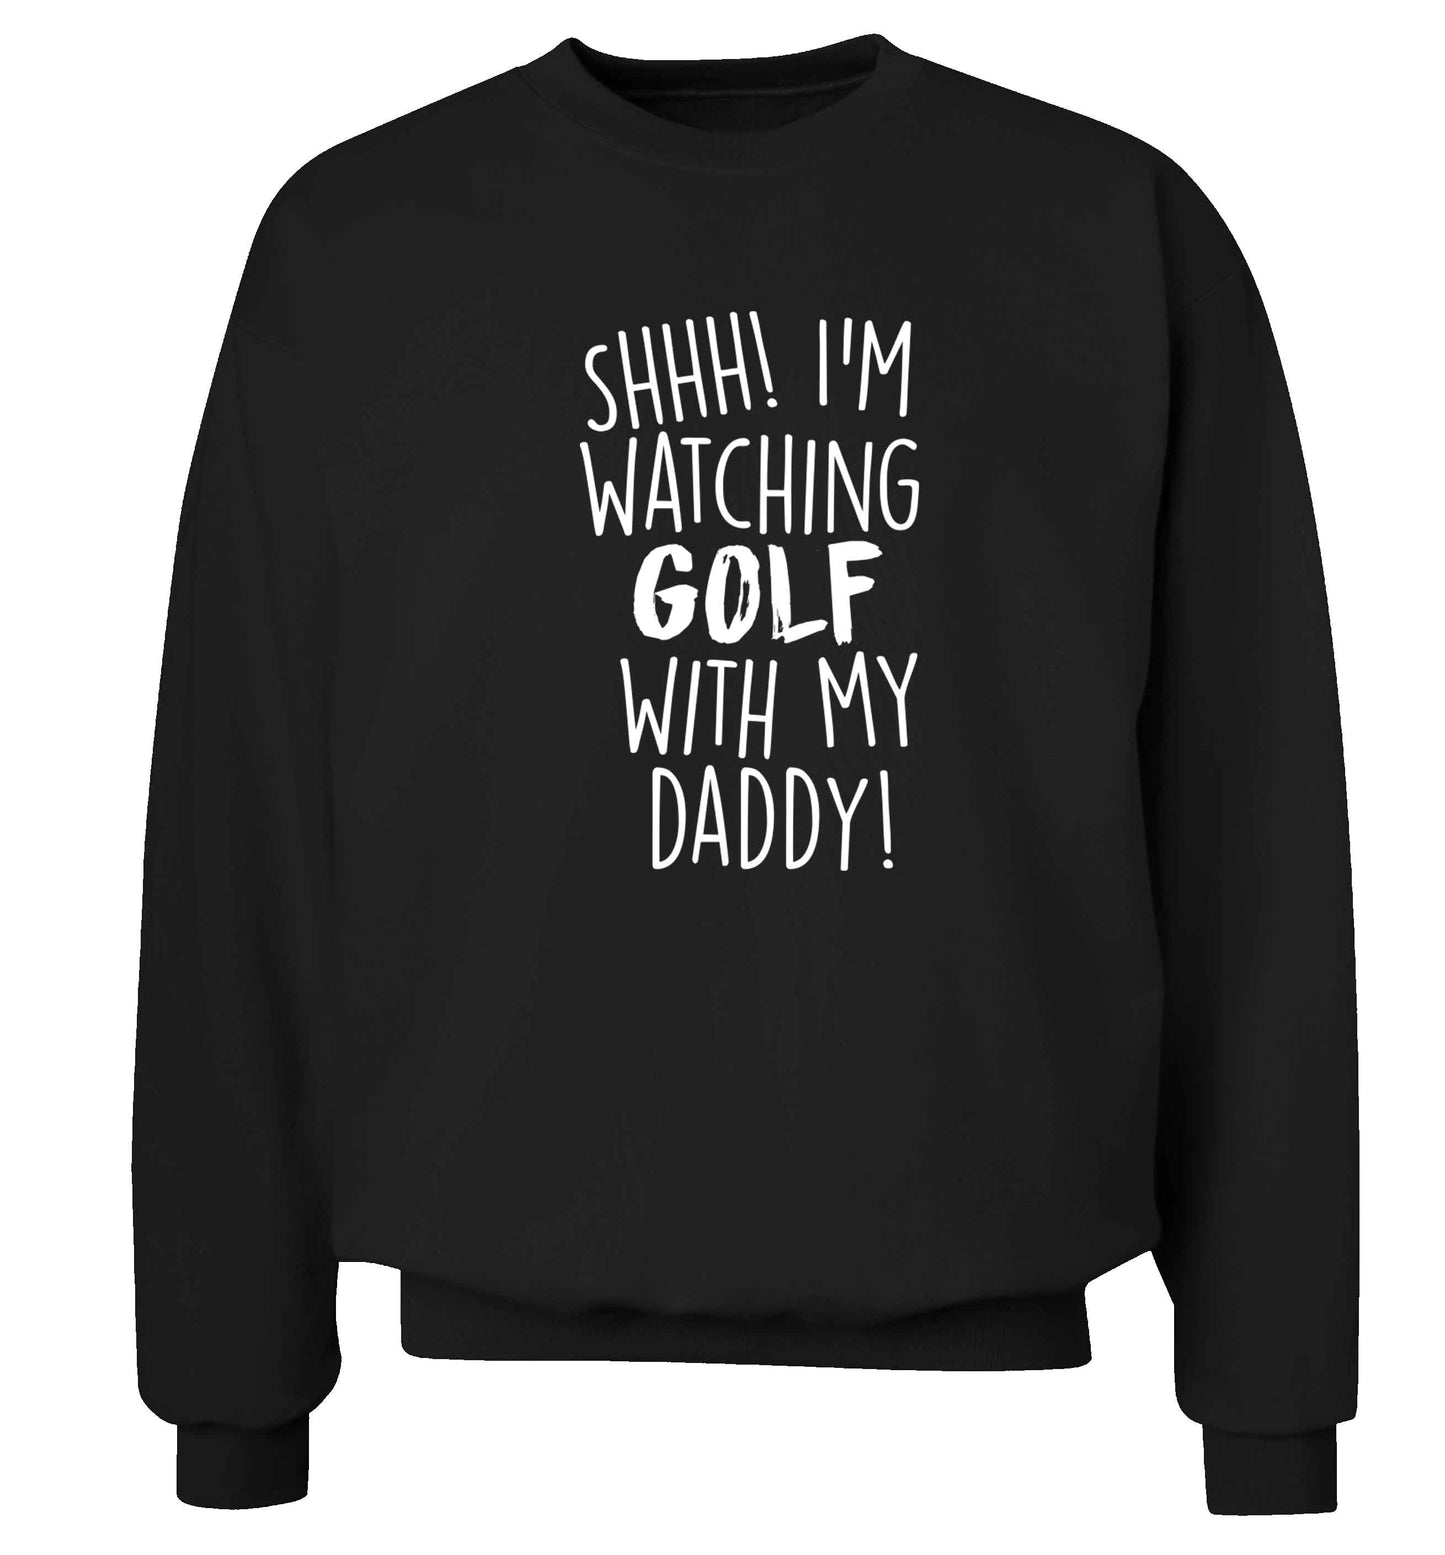 Shh I'm watching golf with my daddy Adult's unisex black Sweater 2XL